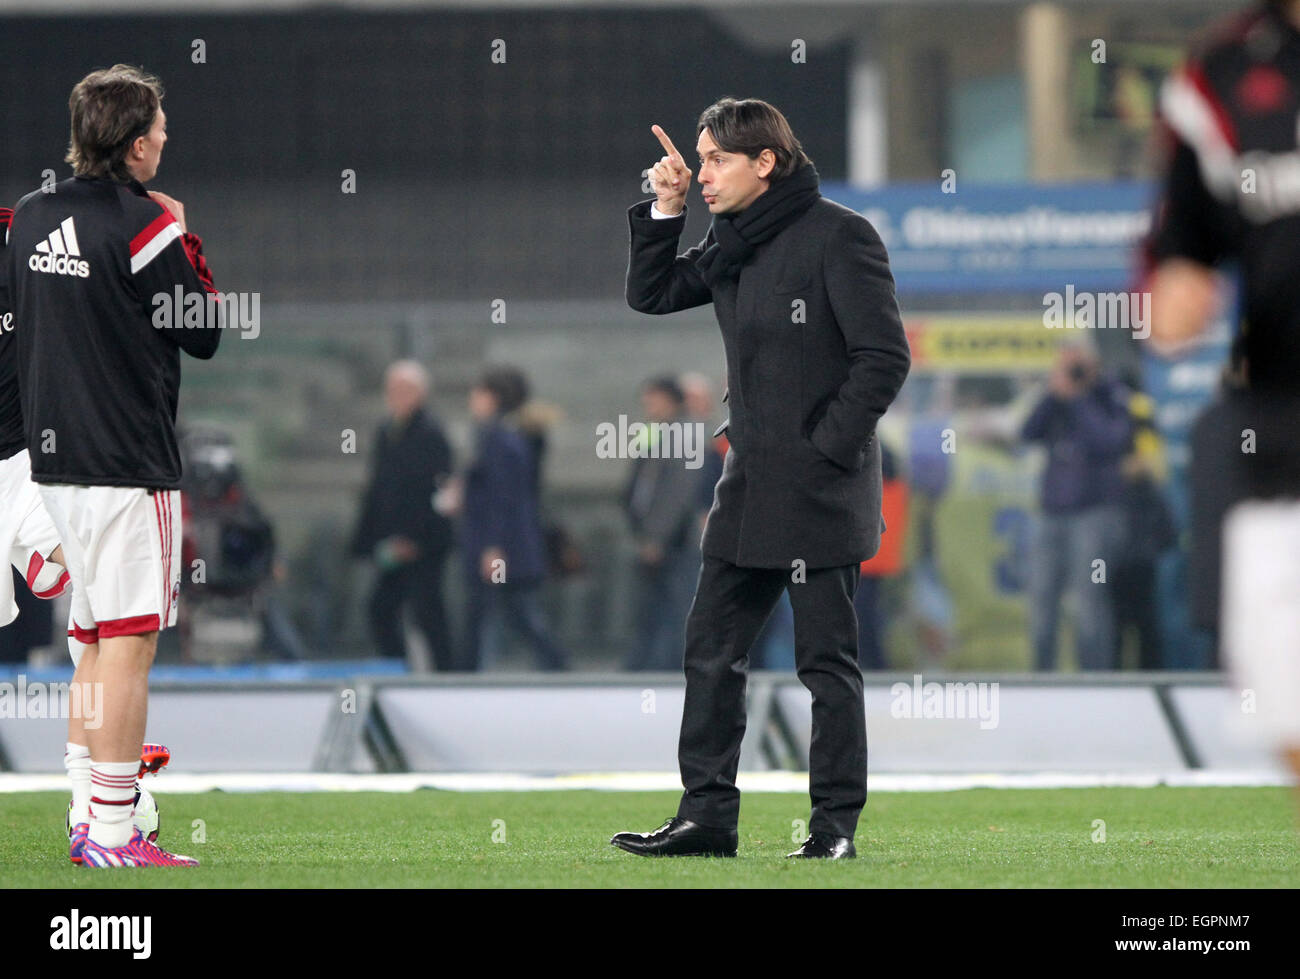 Verona, Italy. 28th February, 2015. Filippo Inzaghi AC Milan's coach during trainig session before the Italian Serie A football match between AC Chievo Verona and AC Milan on Saturday 28 February 2015 at Bentegodi Stadium. Credit:  Andrea Spinelli/Alamy Live News Stock Photo